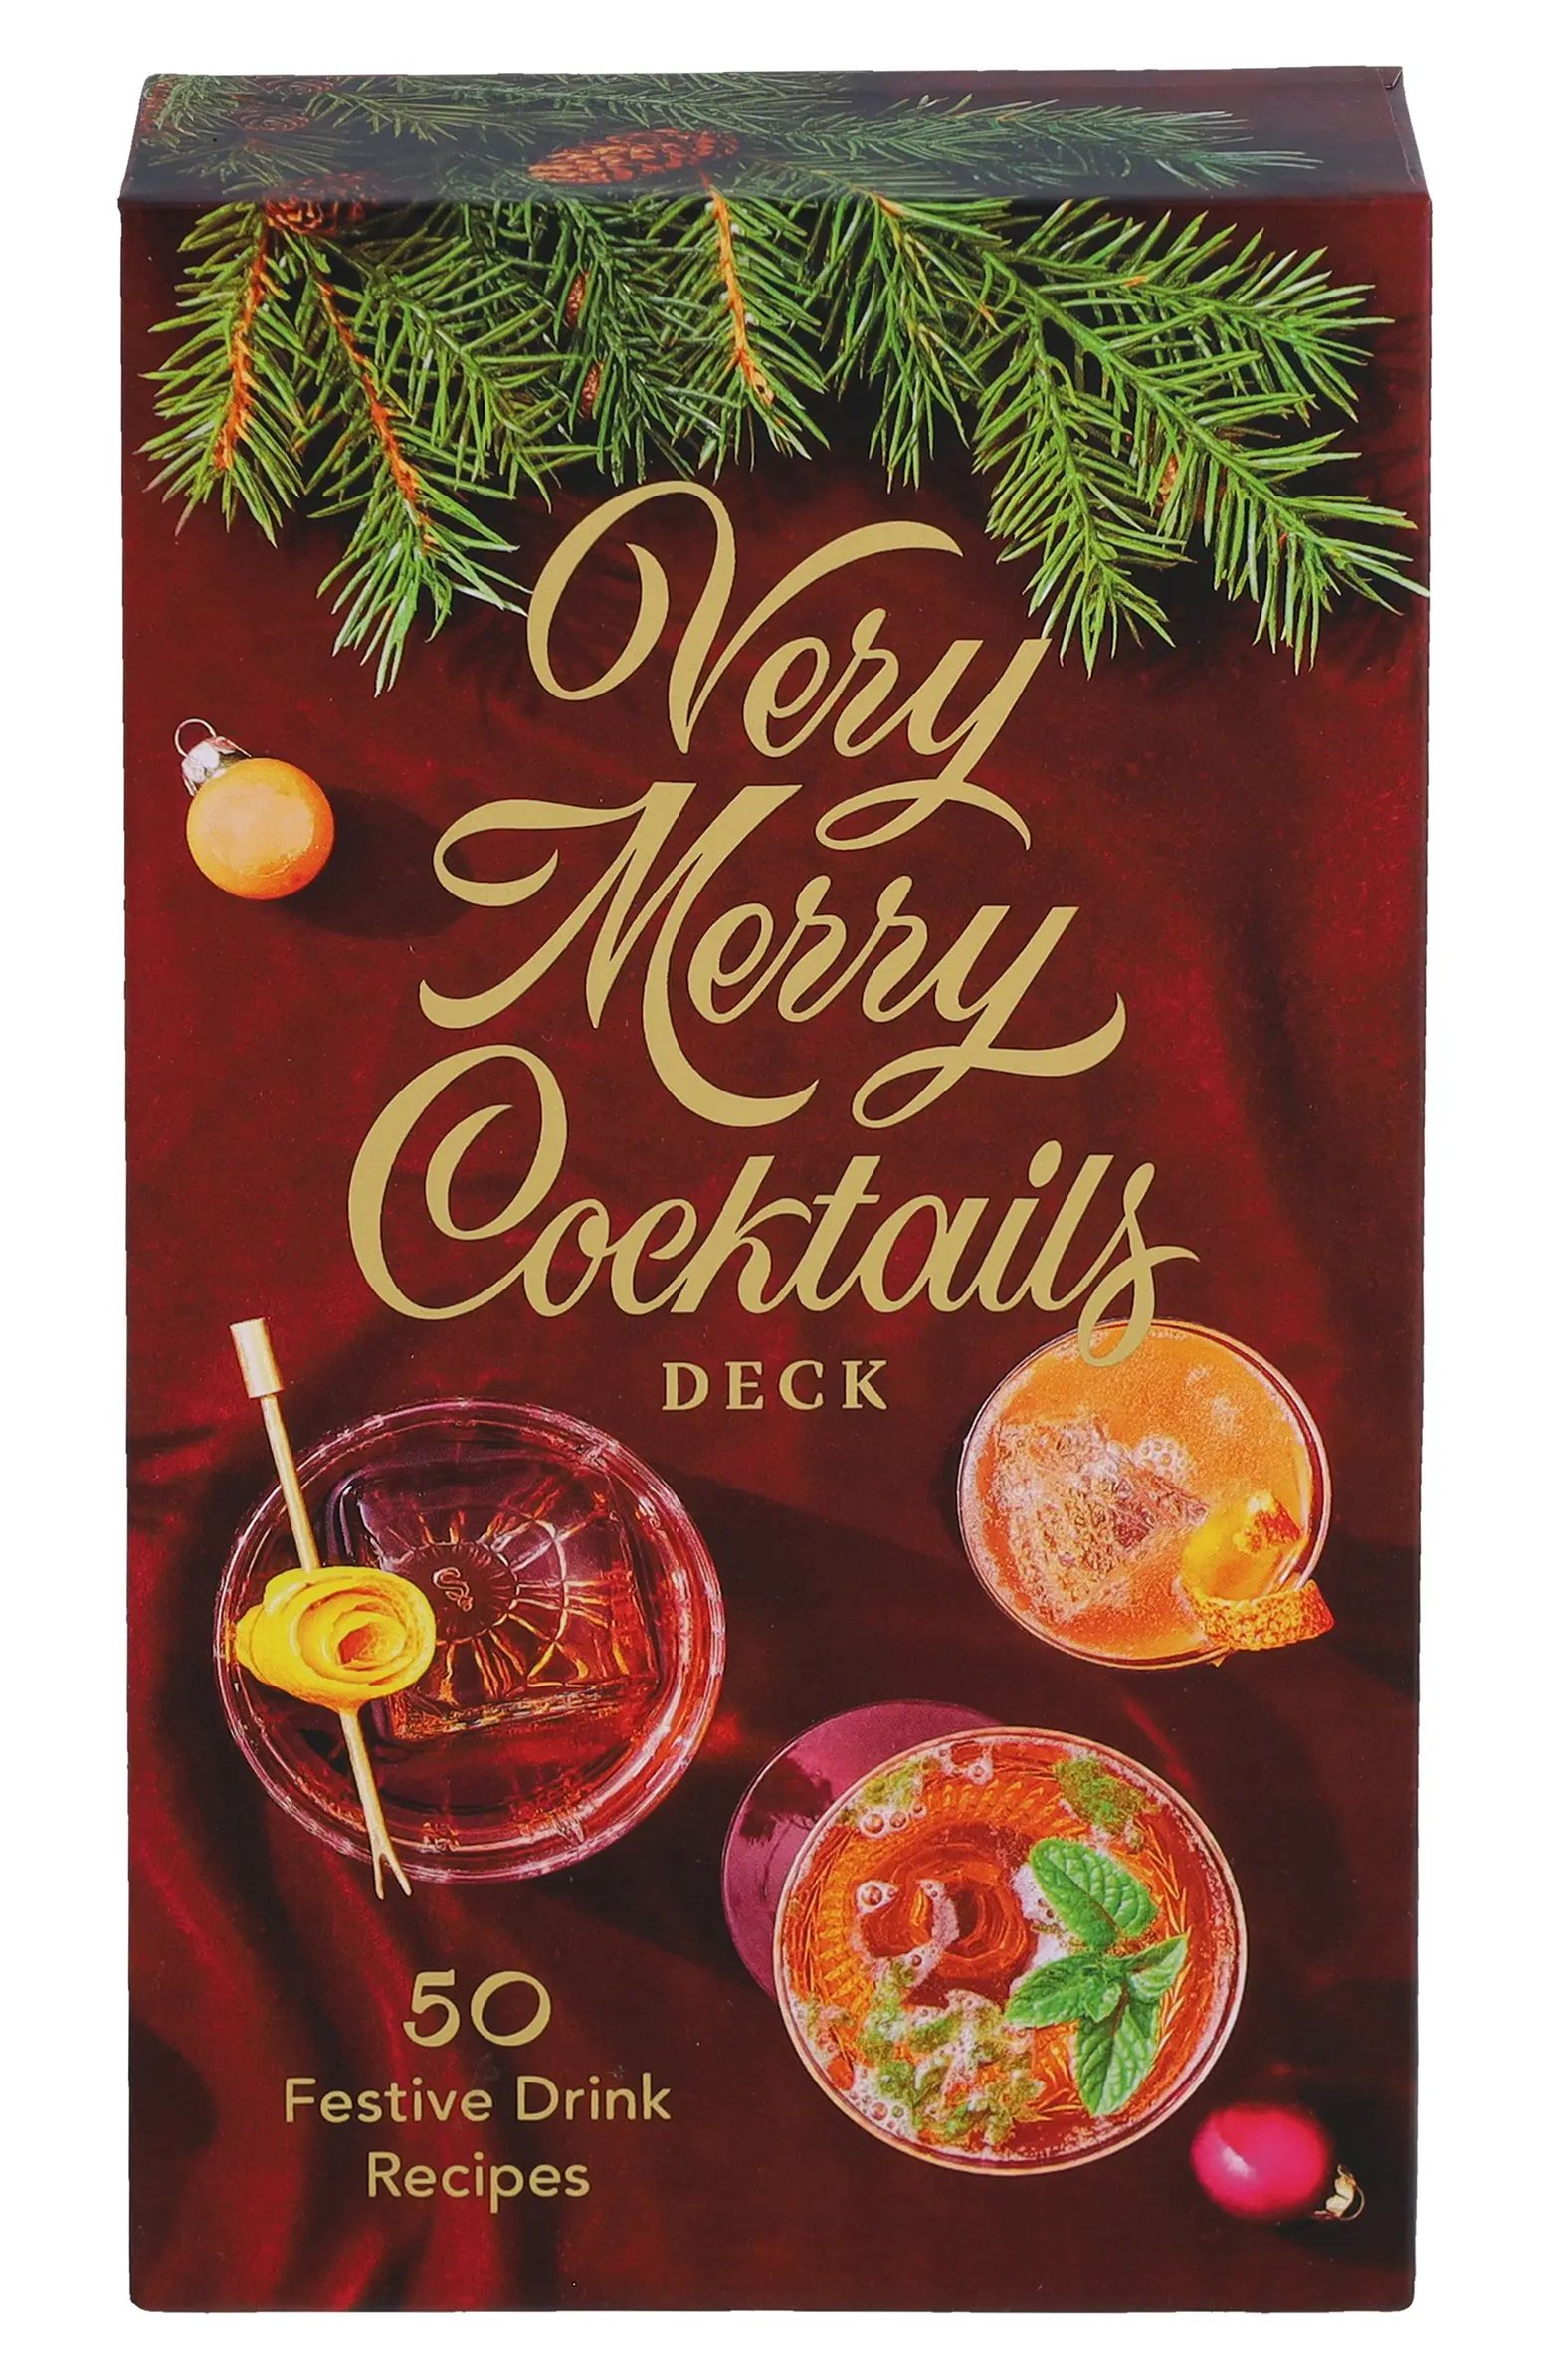 'Very Merry Cocktails' Deck | Nordstrom